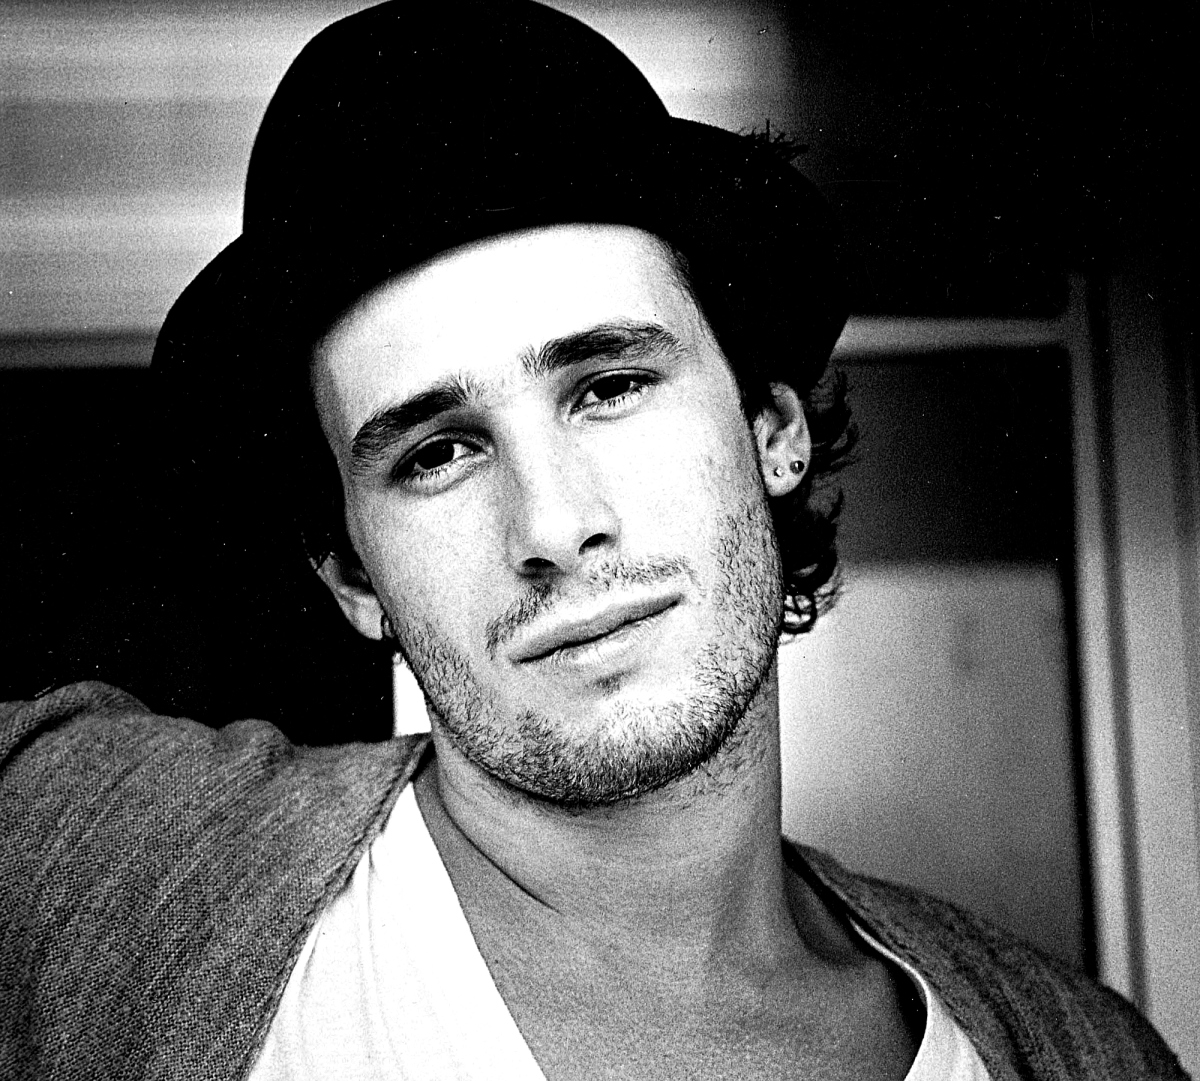 For many people, Jeff Buckley’s version of "Hallelujah" is definitive.